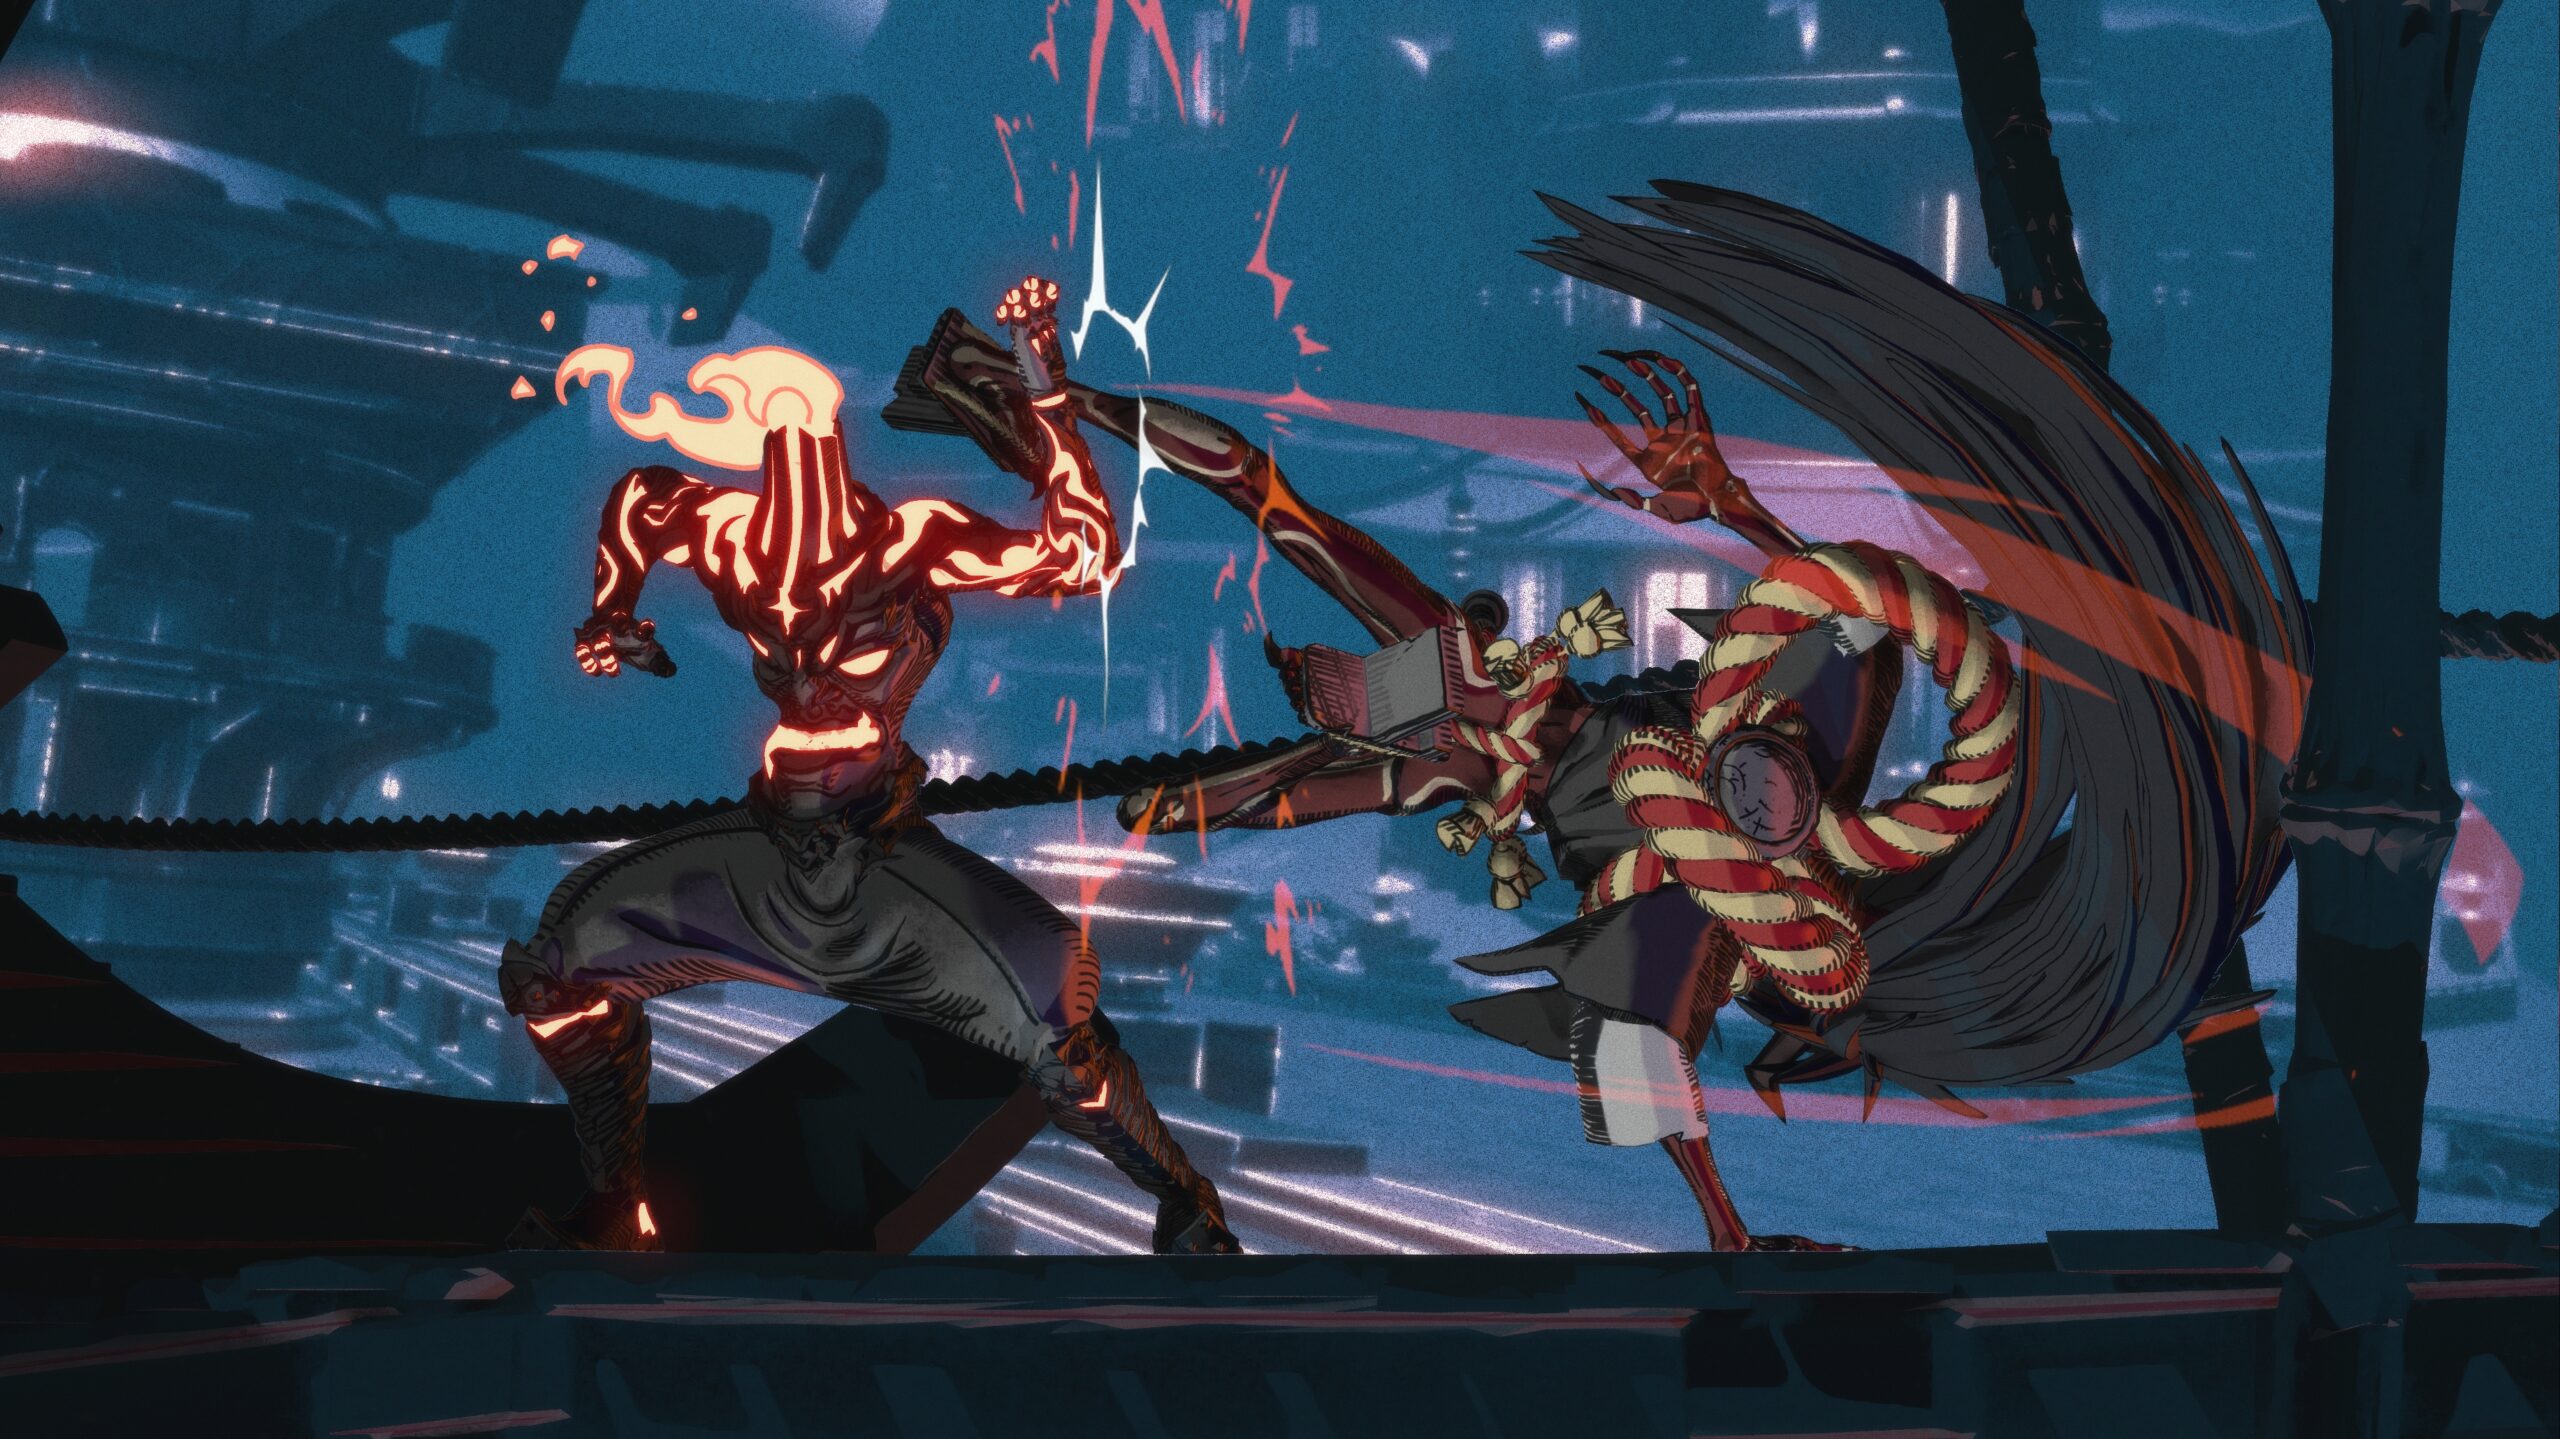 Roguelike side-scrolling beat 'em up game IMMORTAL: And the Death that  Follows announced for PS5, Xbox Series, Switch, and PC - Gematsu